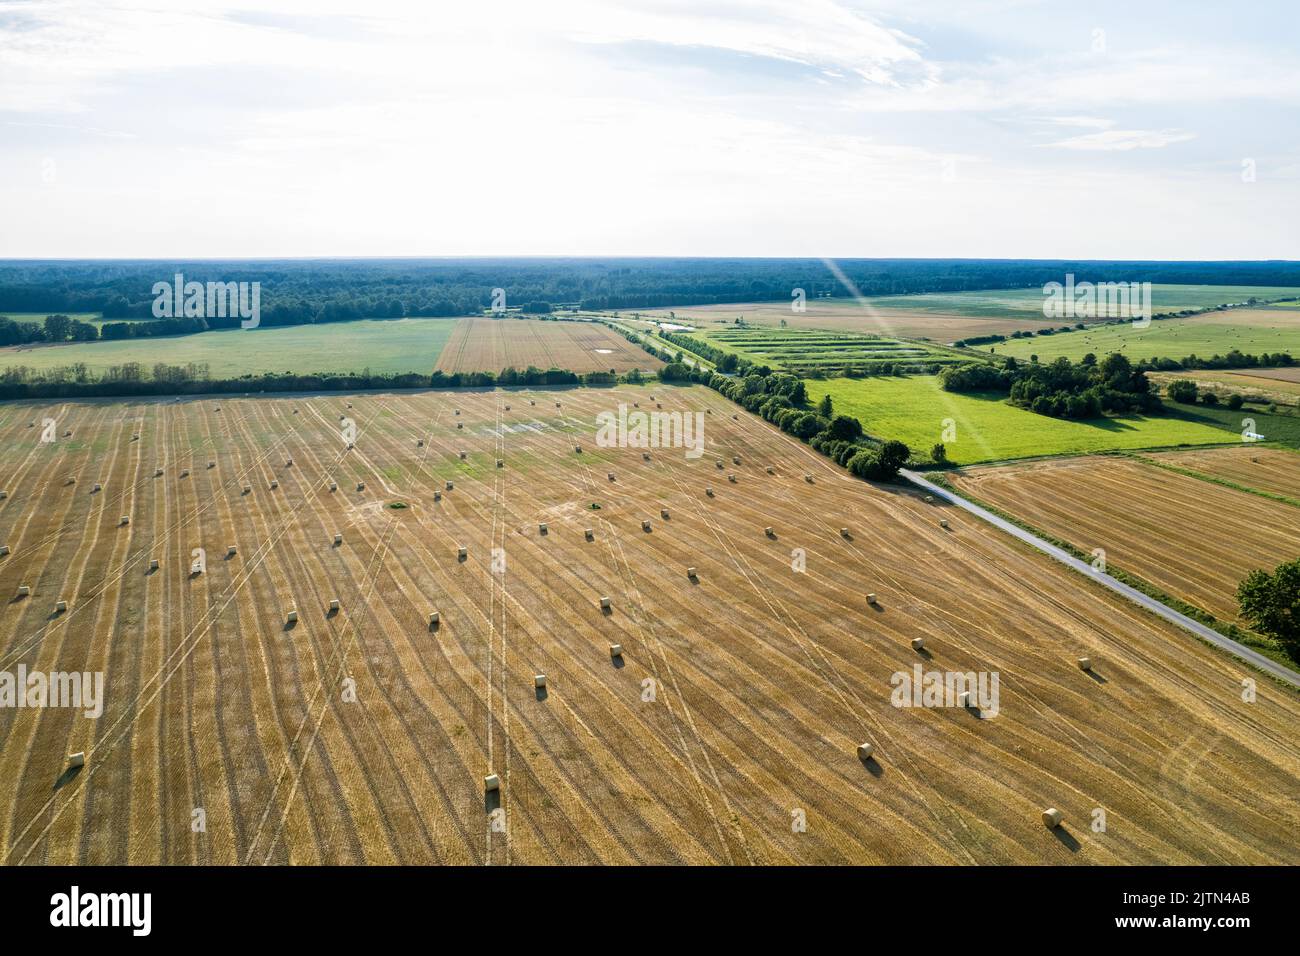 Aerial view of hay bales in the field during hot summer day. Stock Photo